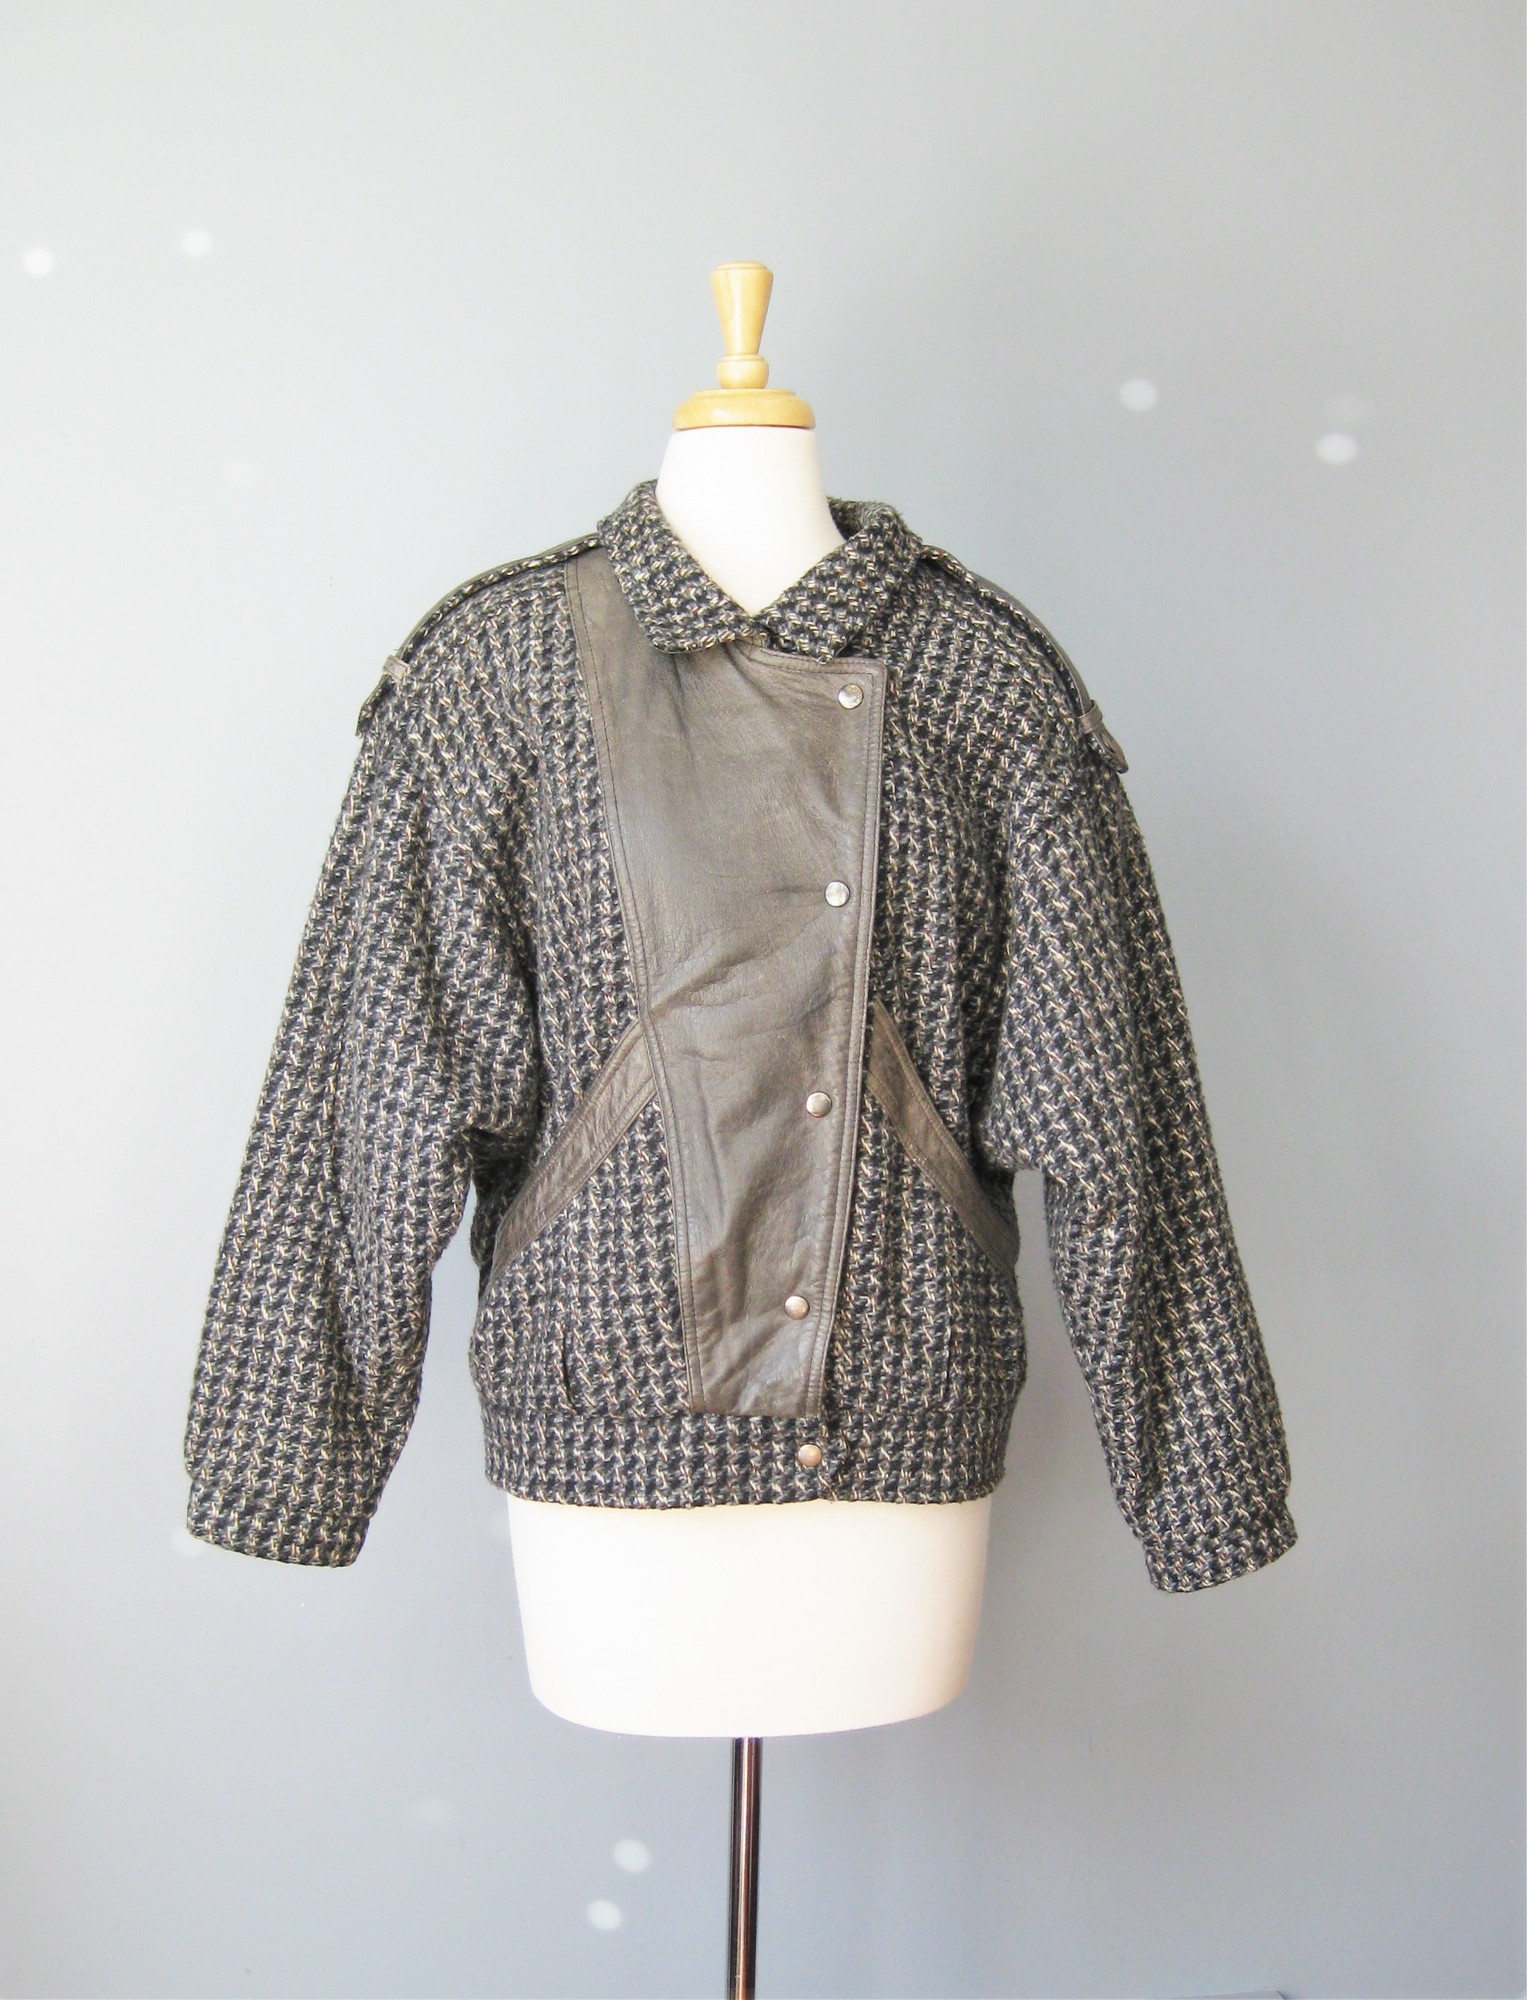 Classic motorcycle jacket with a twist - it's tweed and trimmed in gray leather
Leather Shoulder epaullettes.
Two side pockets
Snap front closure
Excellent condition, with some scratches on one spot of the leather trim.

Marked size M
Will probably fit as a cropped jacket unless you have very slim hips

Flat measurements:
Armpit to armpit: 23 .5in on the inside
Length: 25in

Thank you for looking
#10454